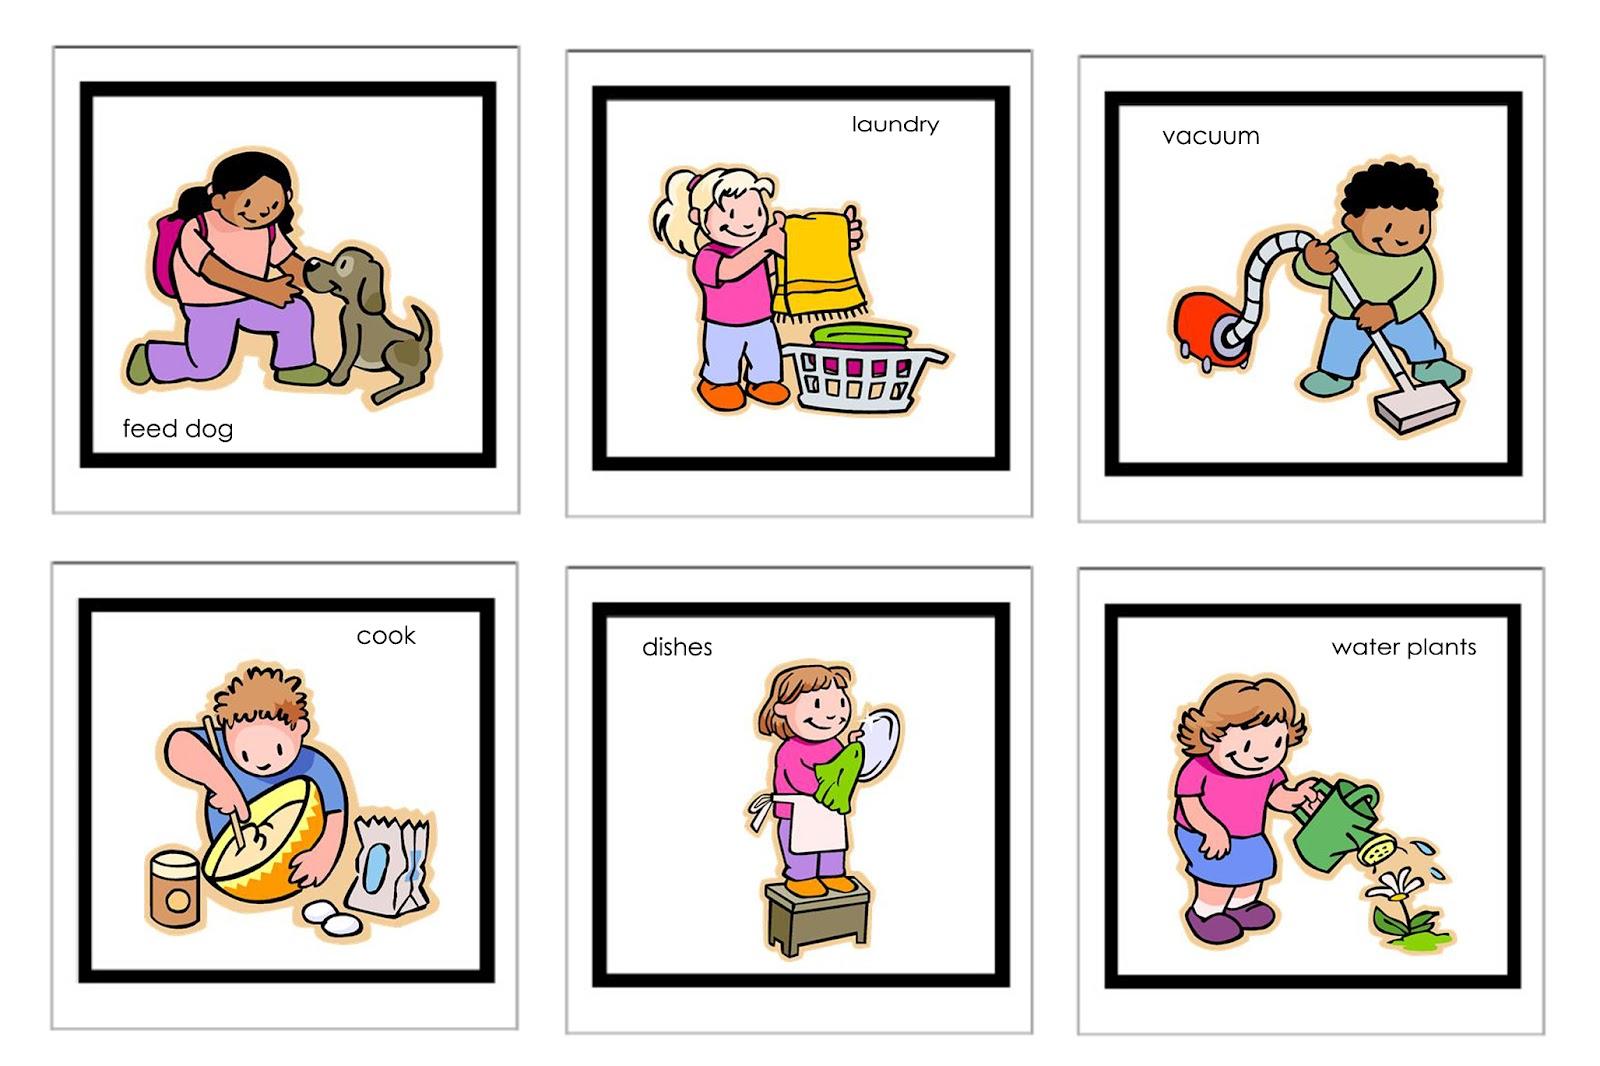 Chore clipart house. Household chores station 